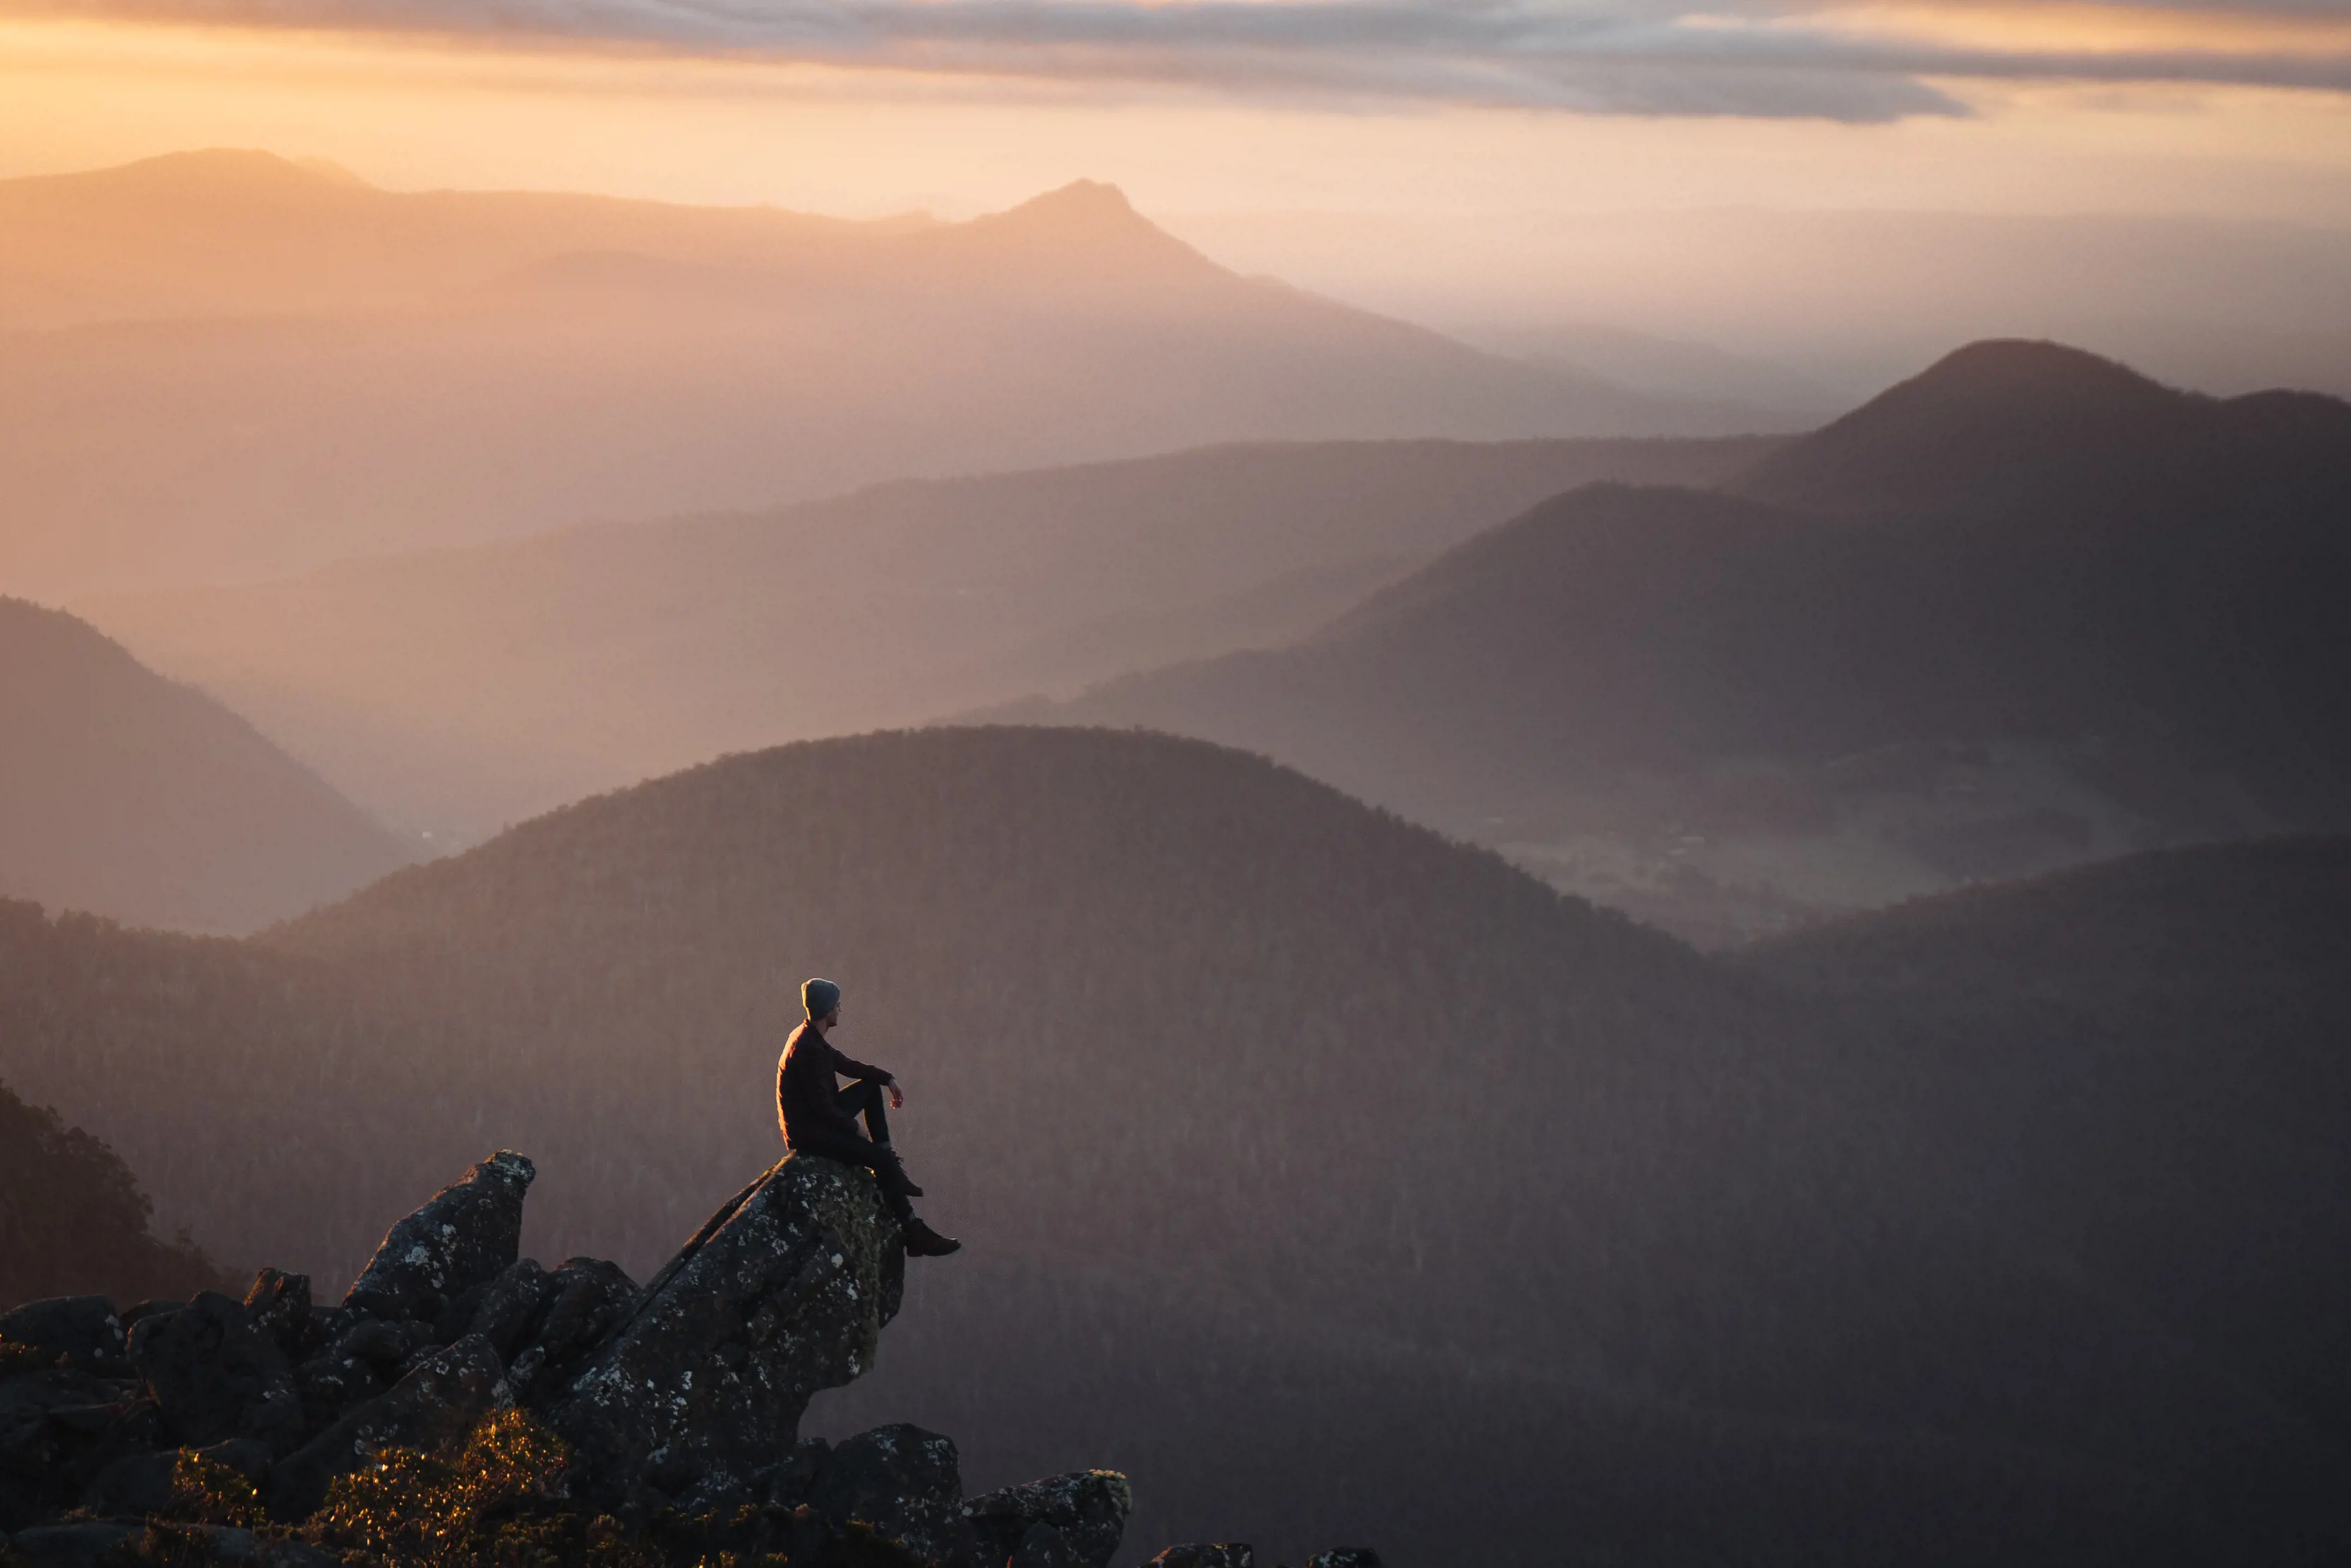 Incredible, dramatic image of a person sitting on a rock, on the Summit of kunanyi / Mt Wellington, overlooking the vast landscape during sunrise.